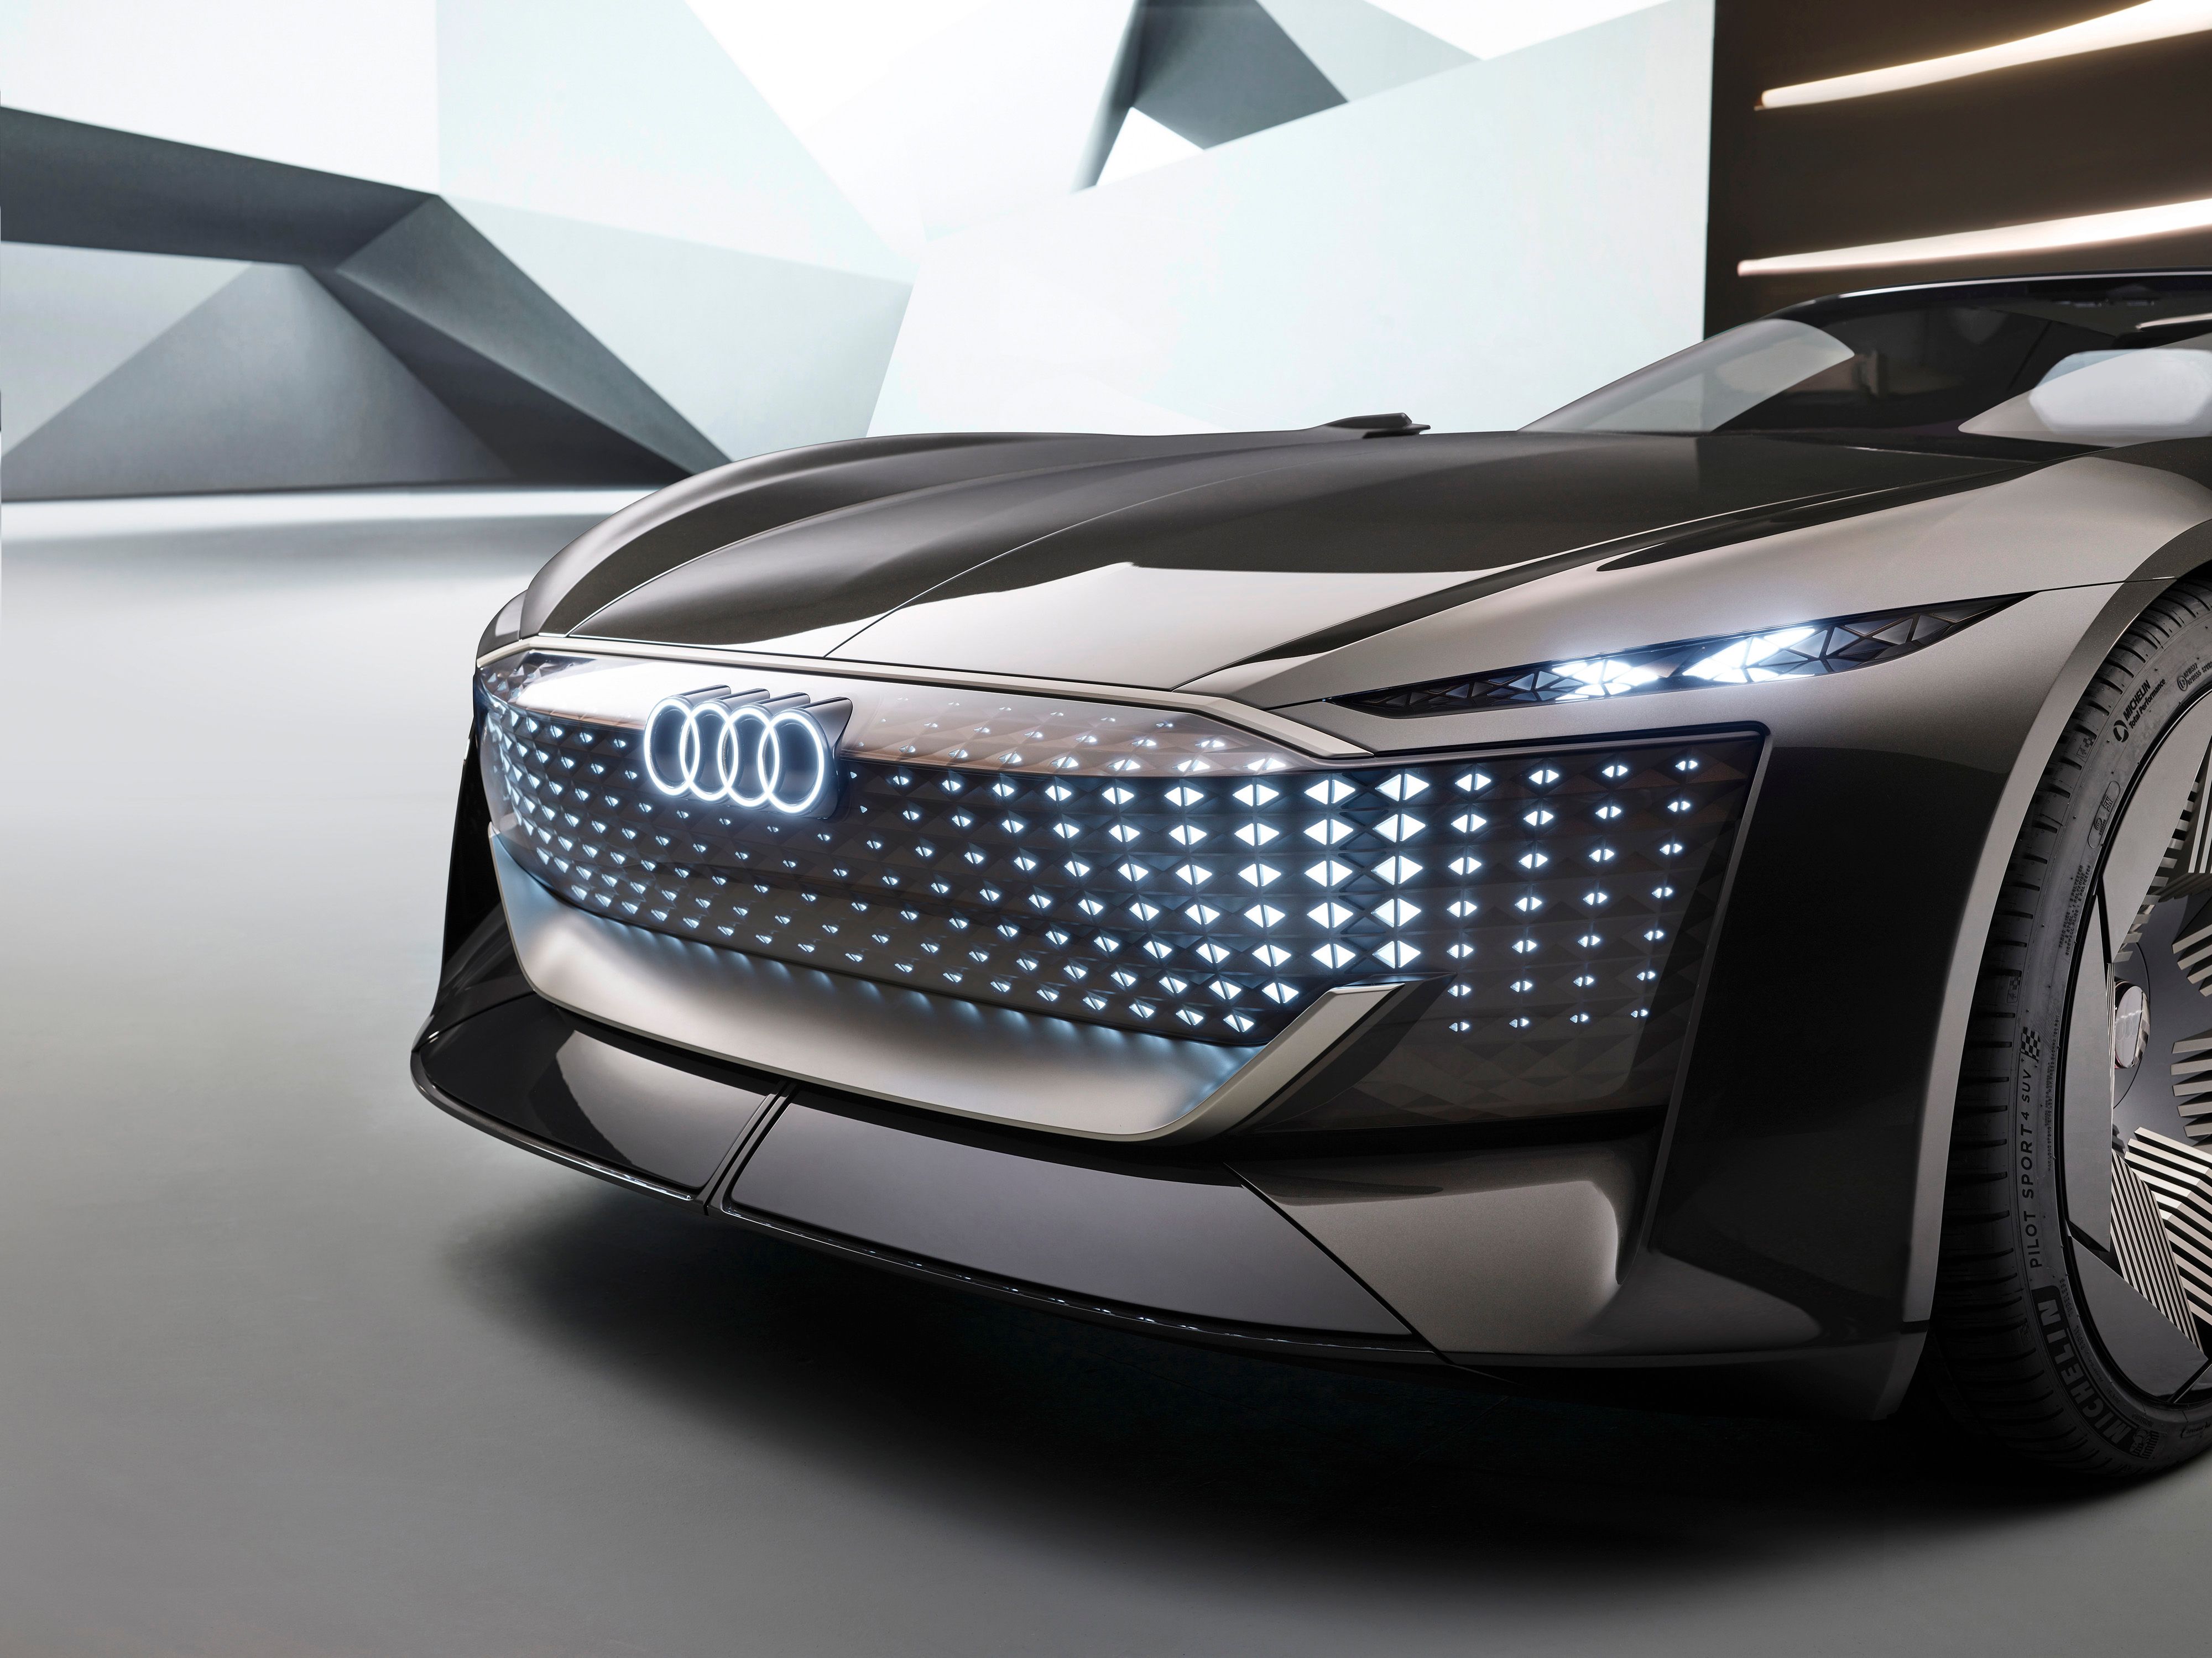 2021 Audi Skysphere Concept - A Transformer That Can Change Shape On The Fly